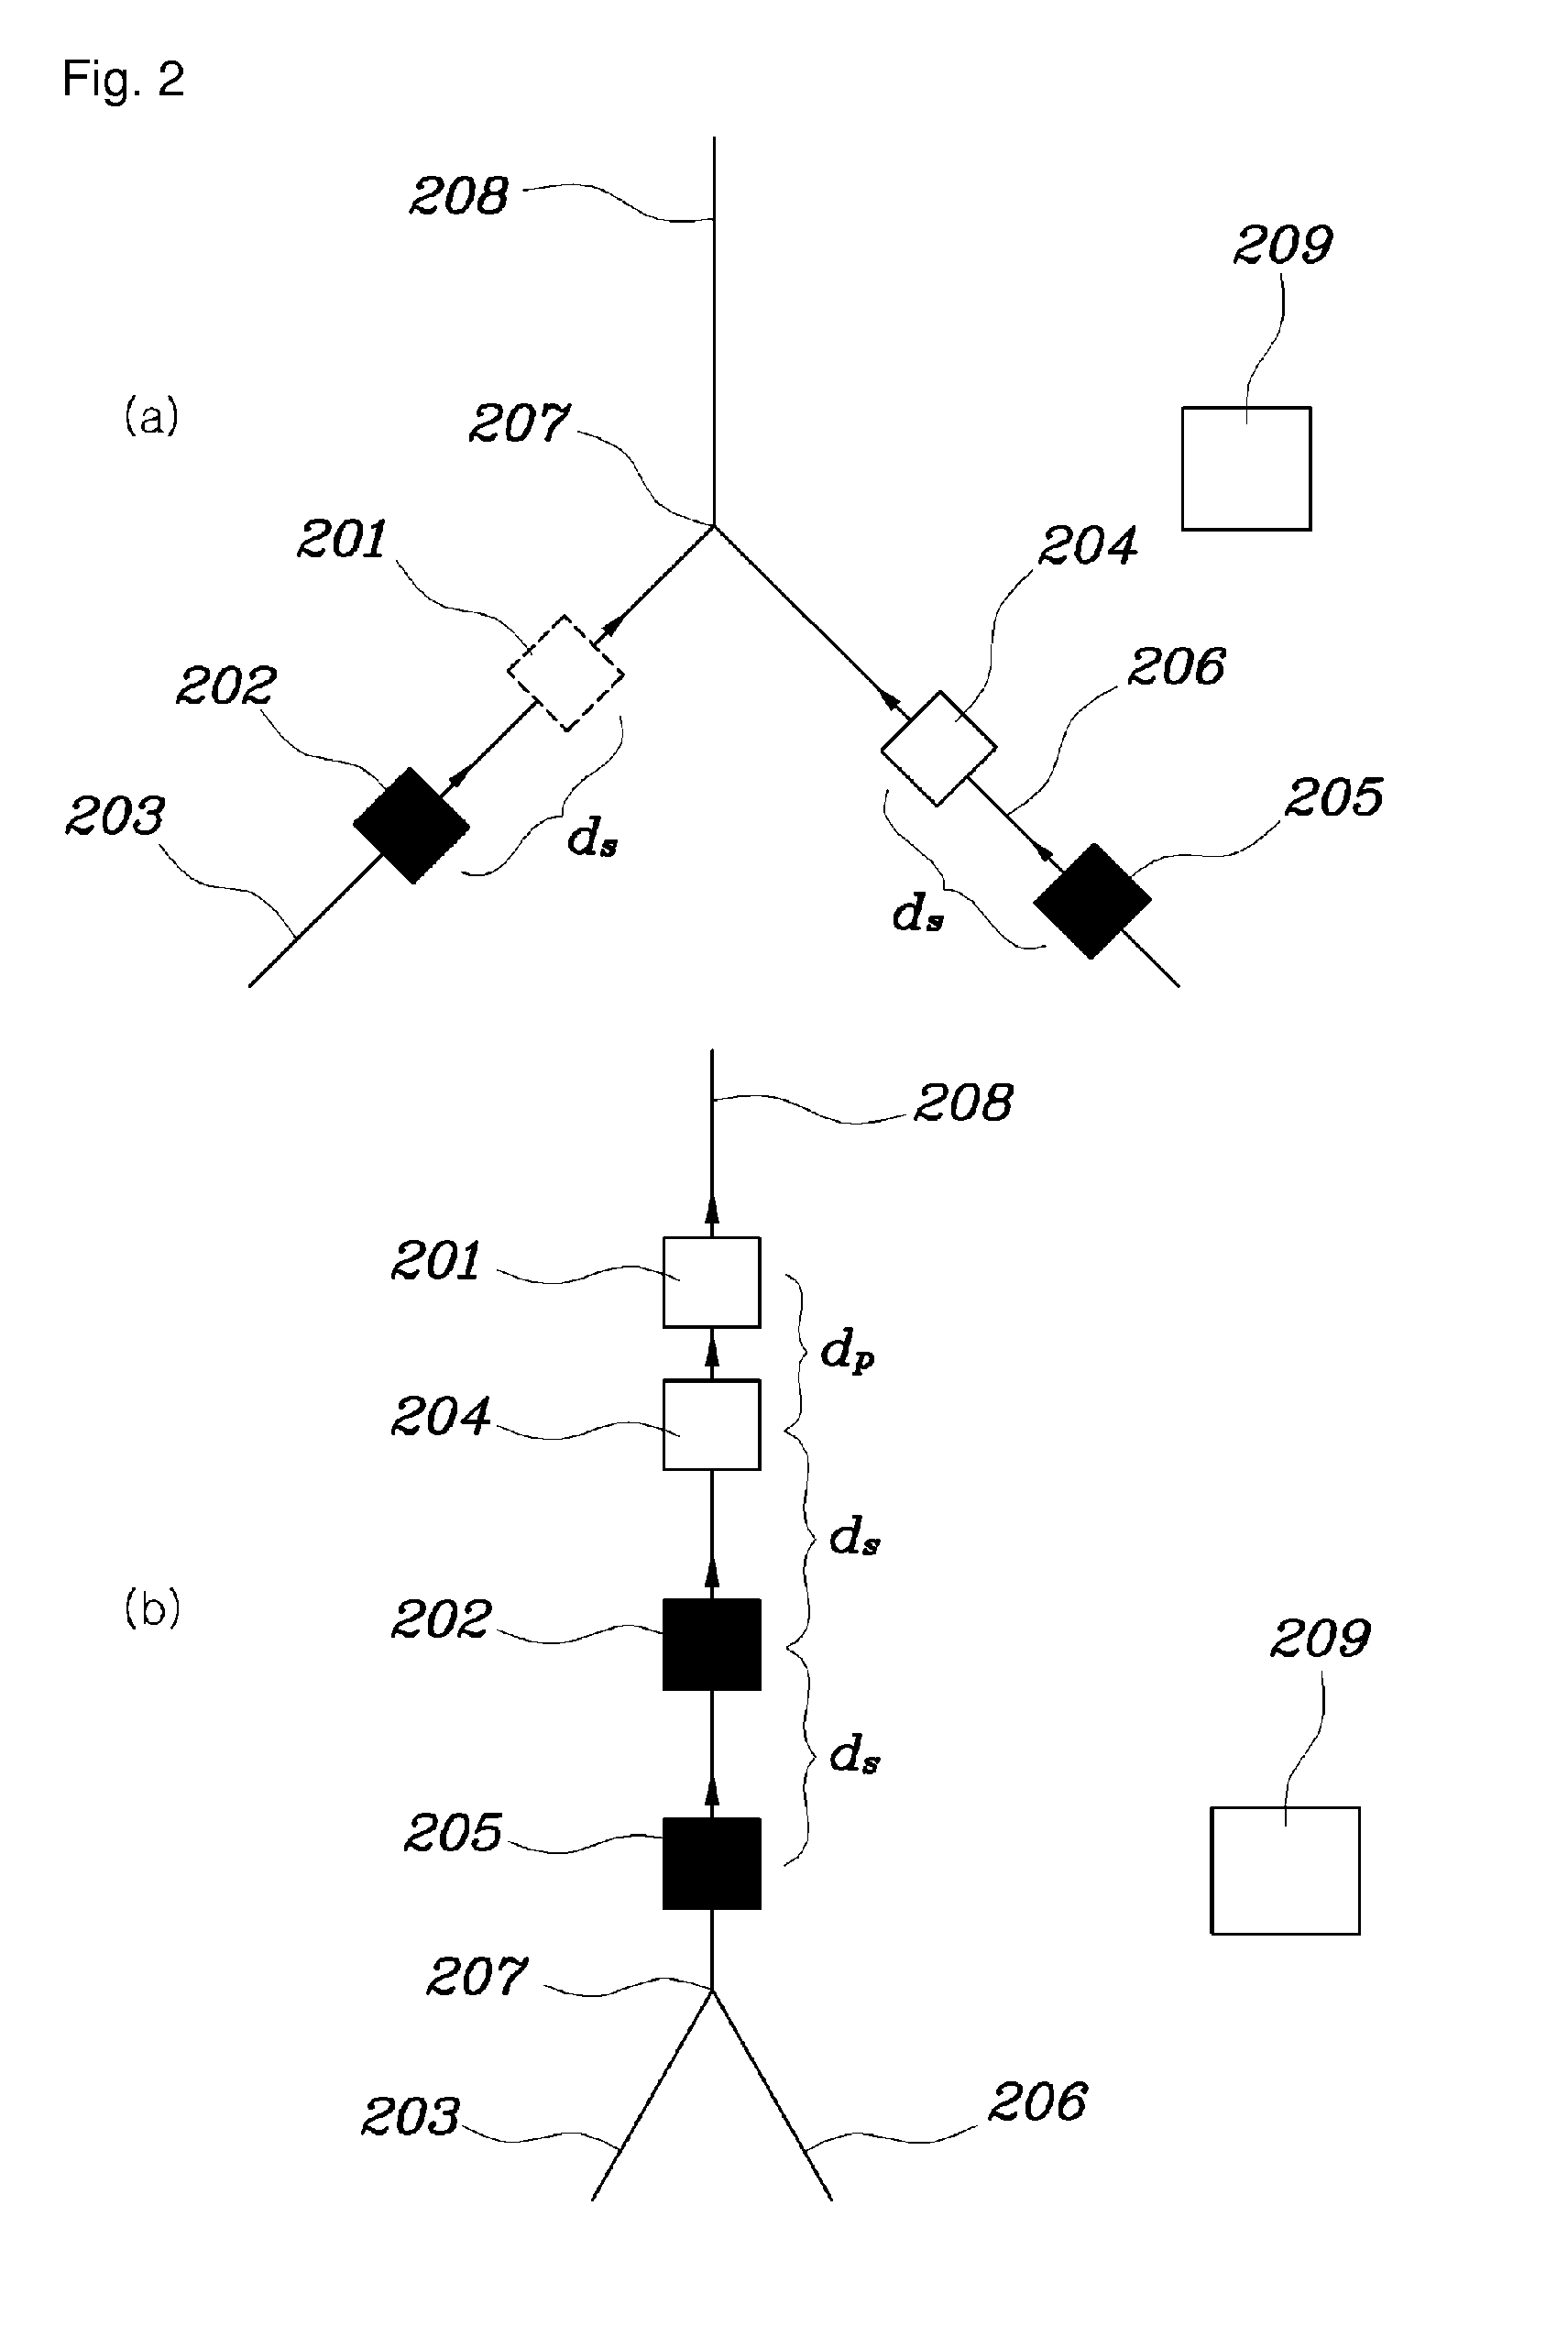 Method for platooning of vehicles in an automated vehicle system